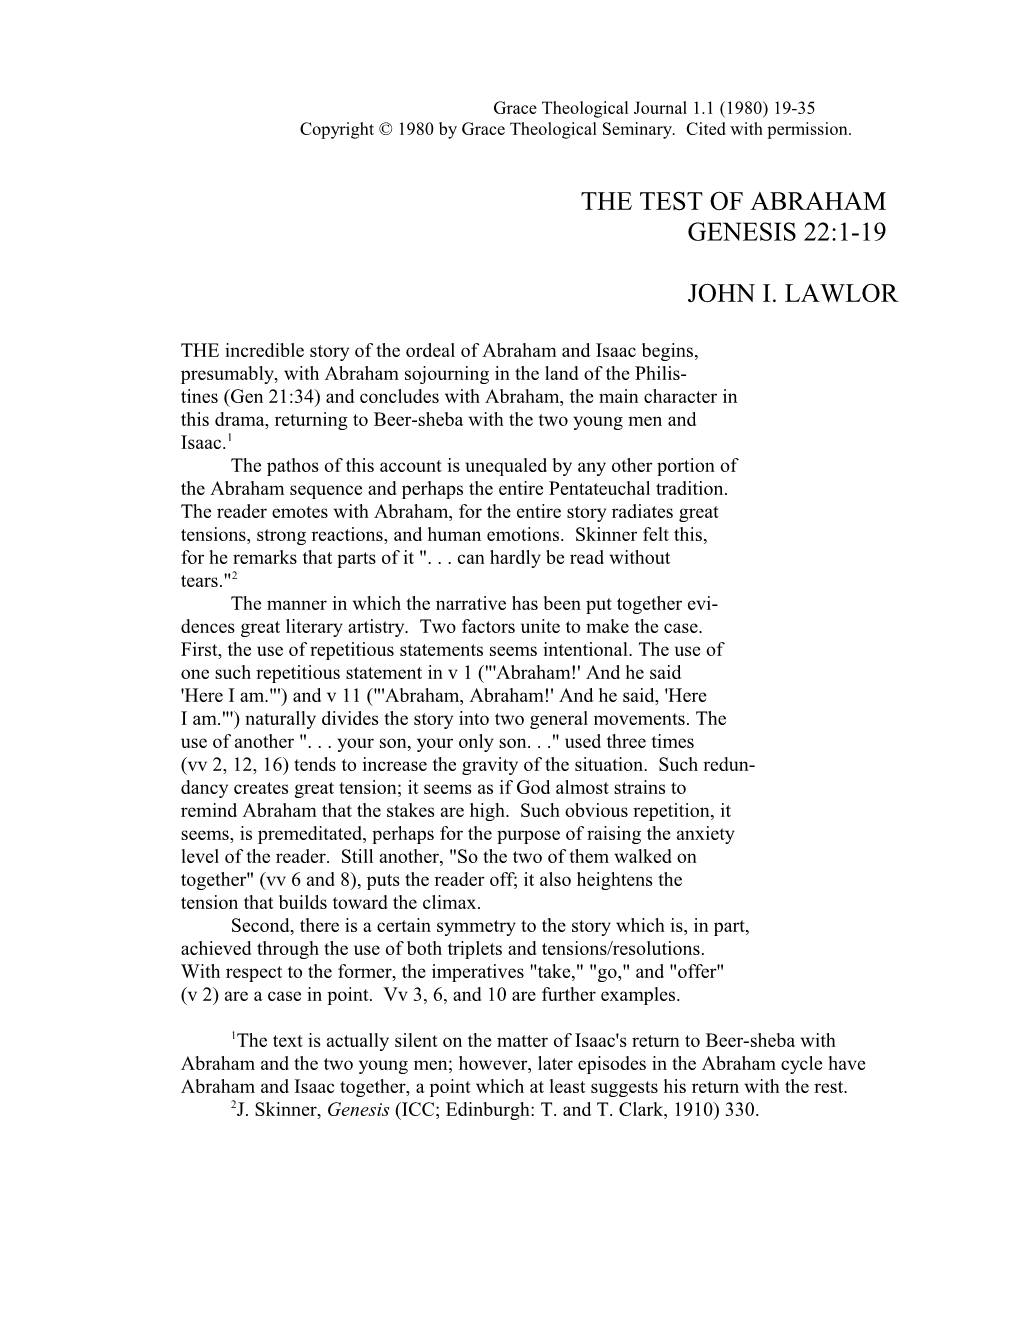 The Test of Abraham